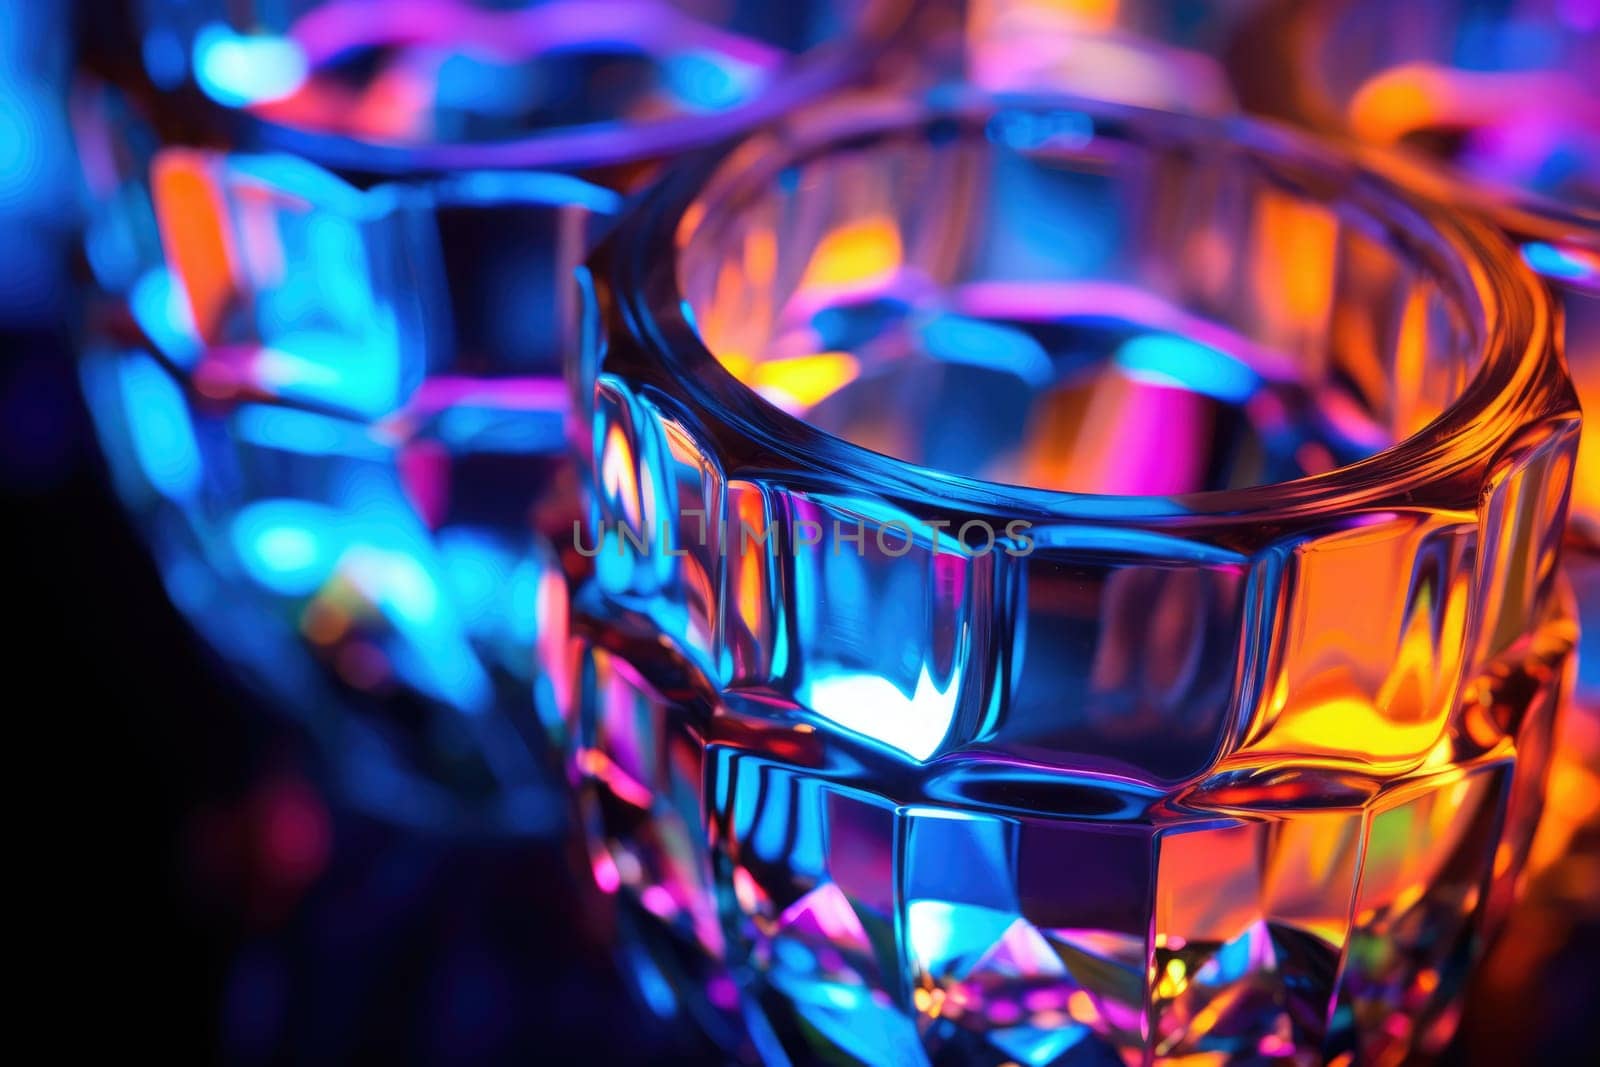 Bright colourful glass objects of different shapes in neon colours by palinchak